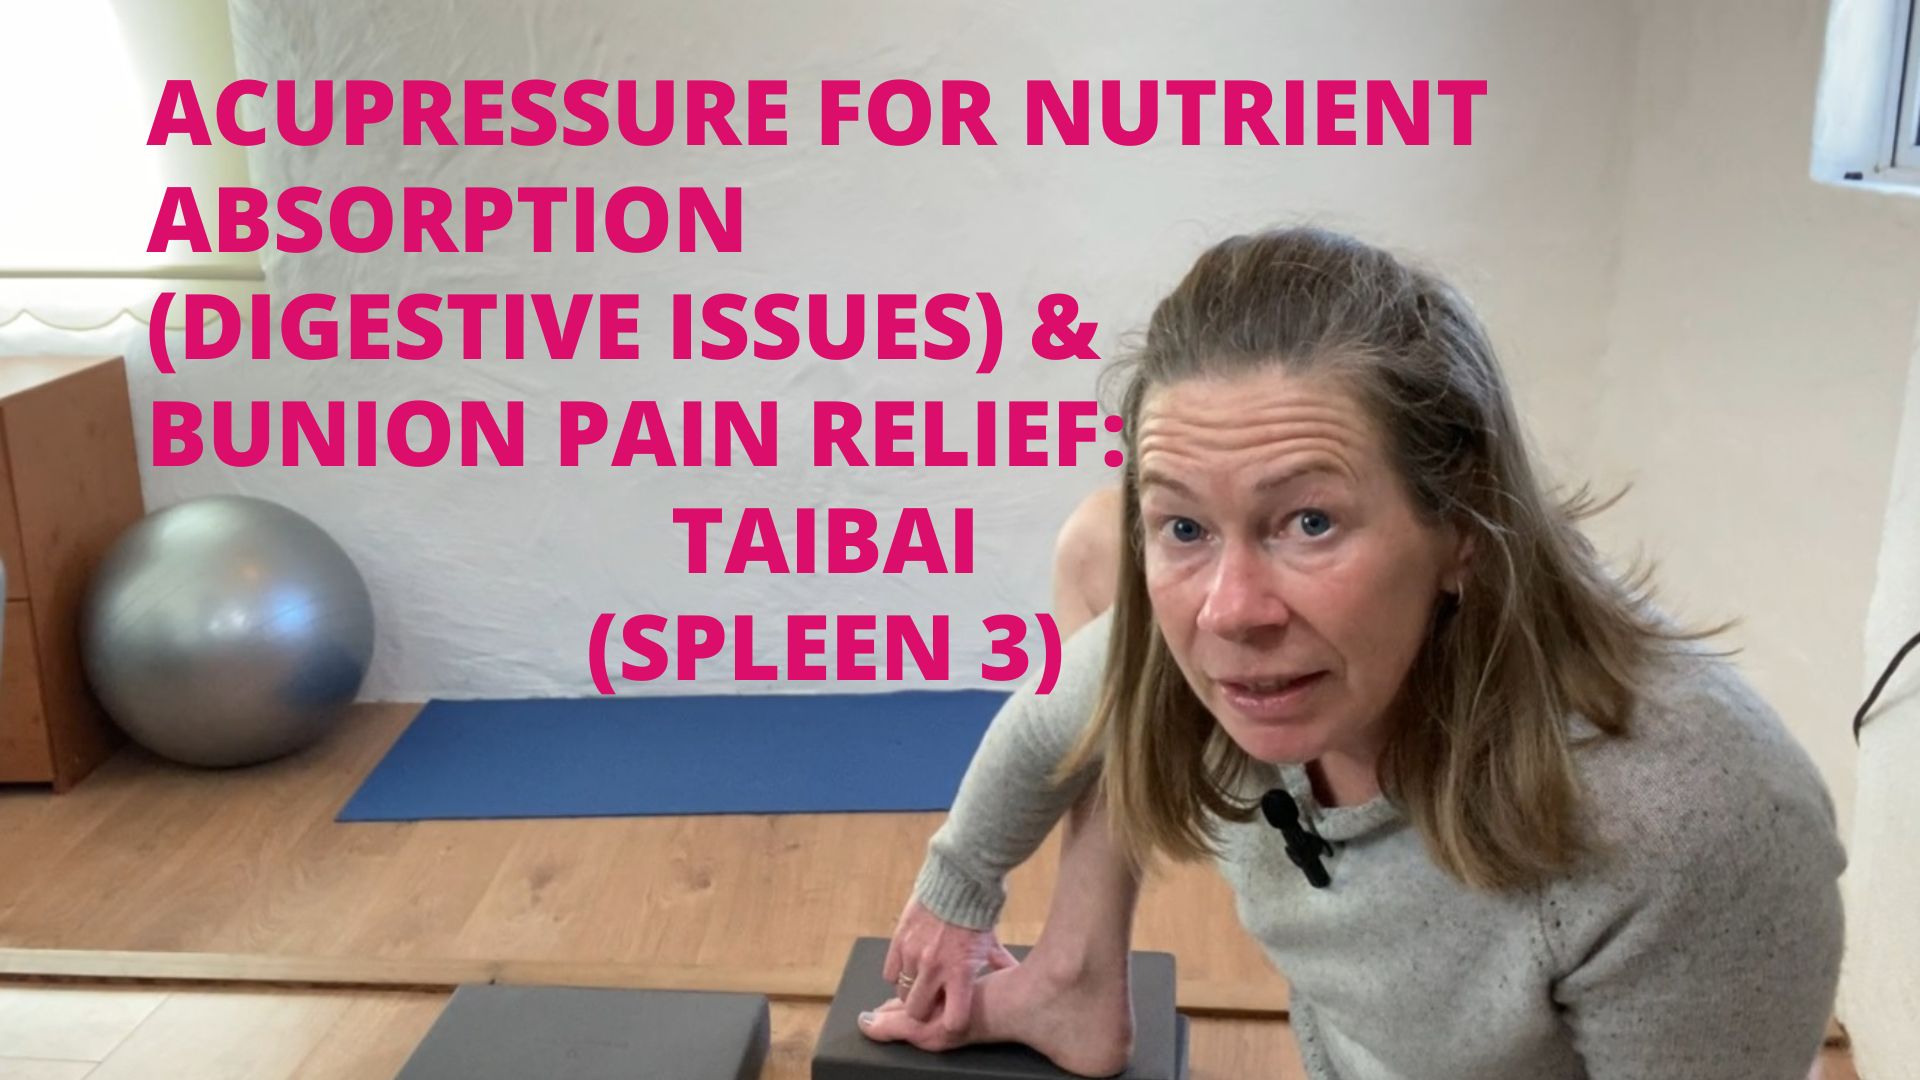 Acupressure For Digestion and Absorption of Nutrients (also bunions): Spleen 3 (Taibai)